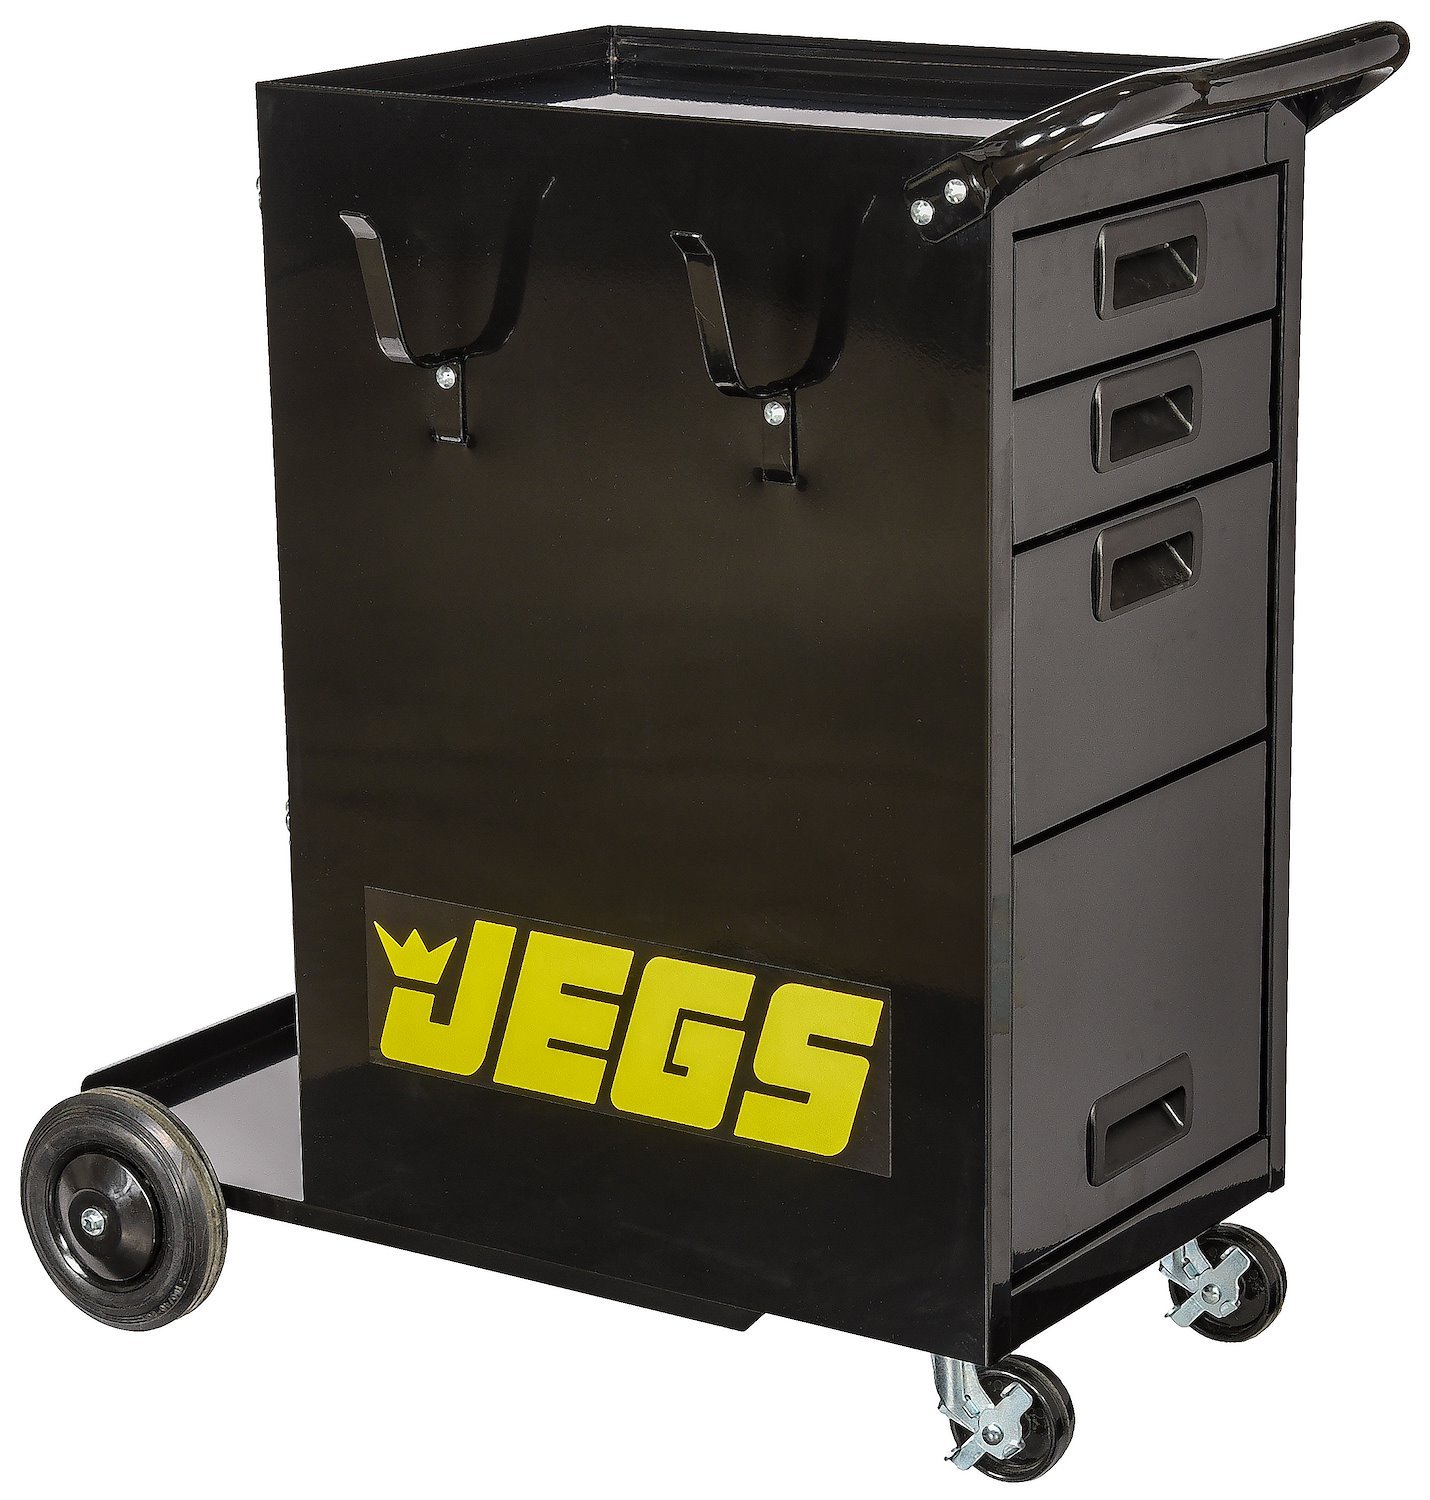 Large Wire 30 in. W x 18 in. D x 30 in. H Utility Cart Chrome Plated Steel  Finish